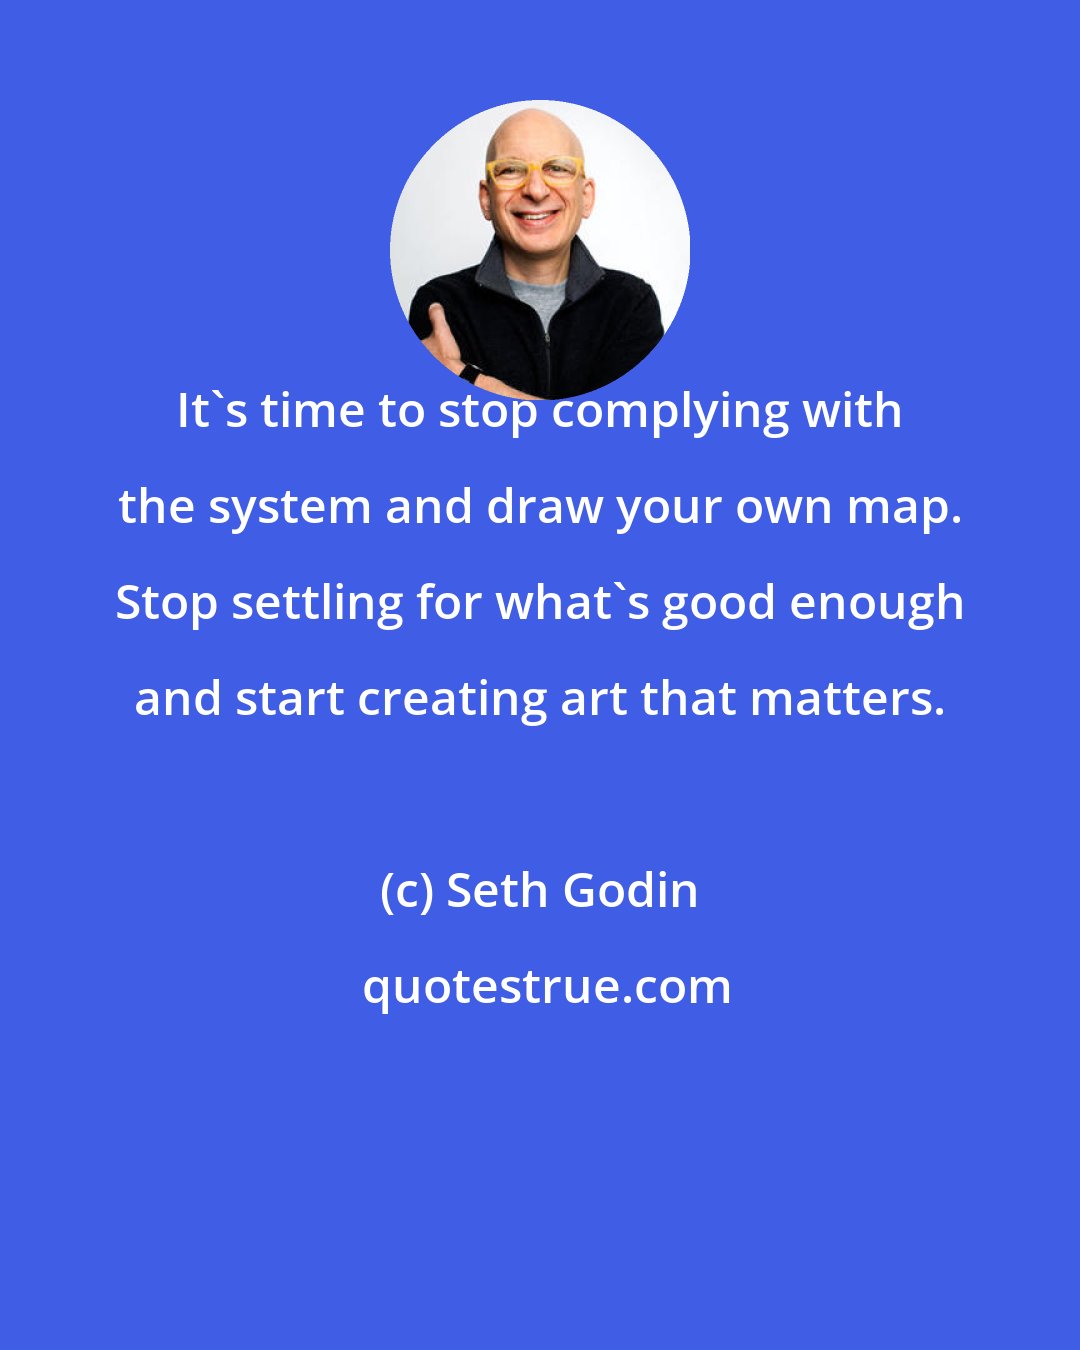 Seth Godin: It's time to stop complying with the system and draw your own map. Stop settling for what's good enough and start creating art that matters.